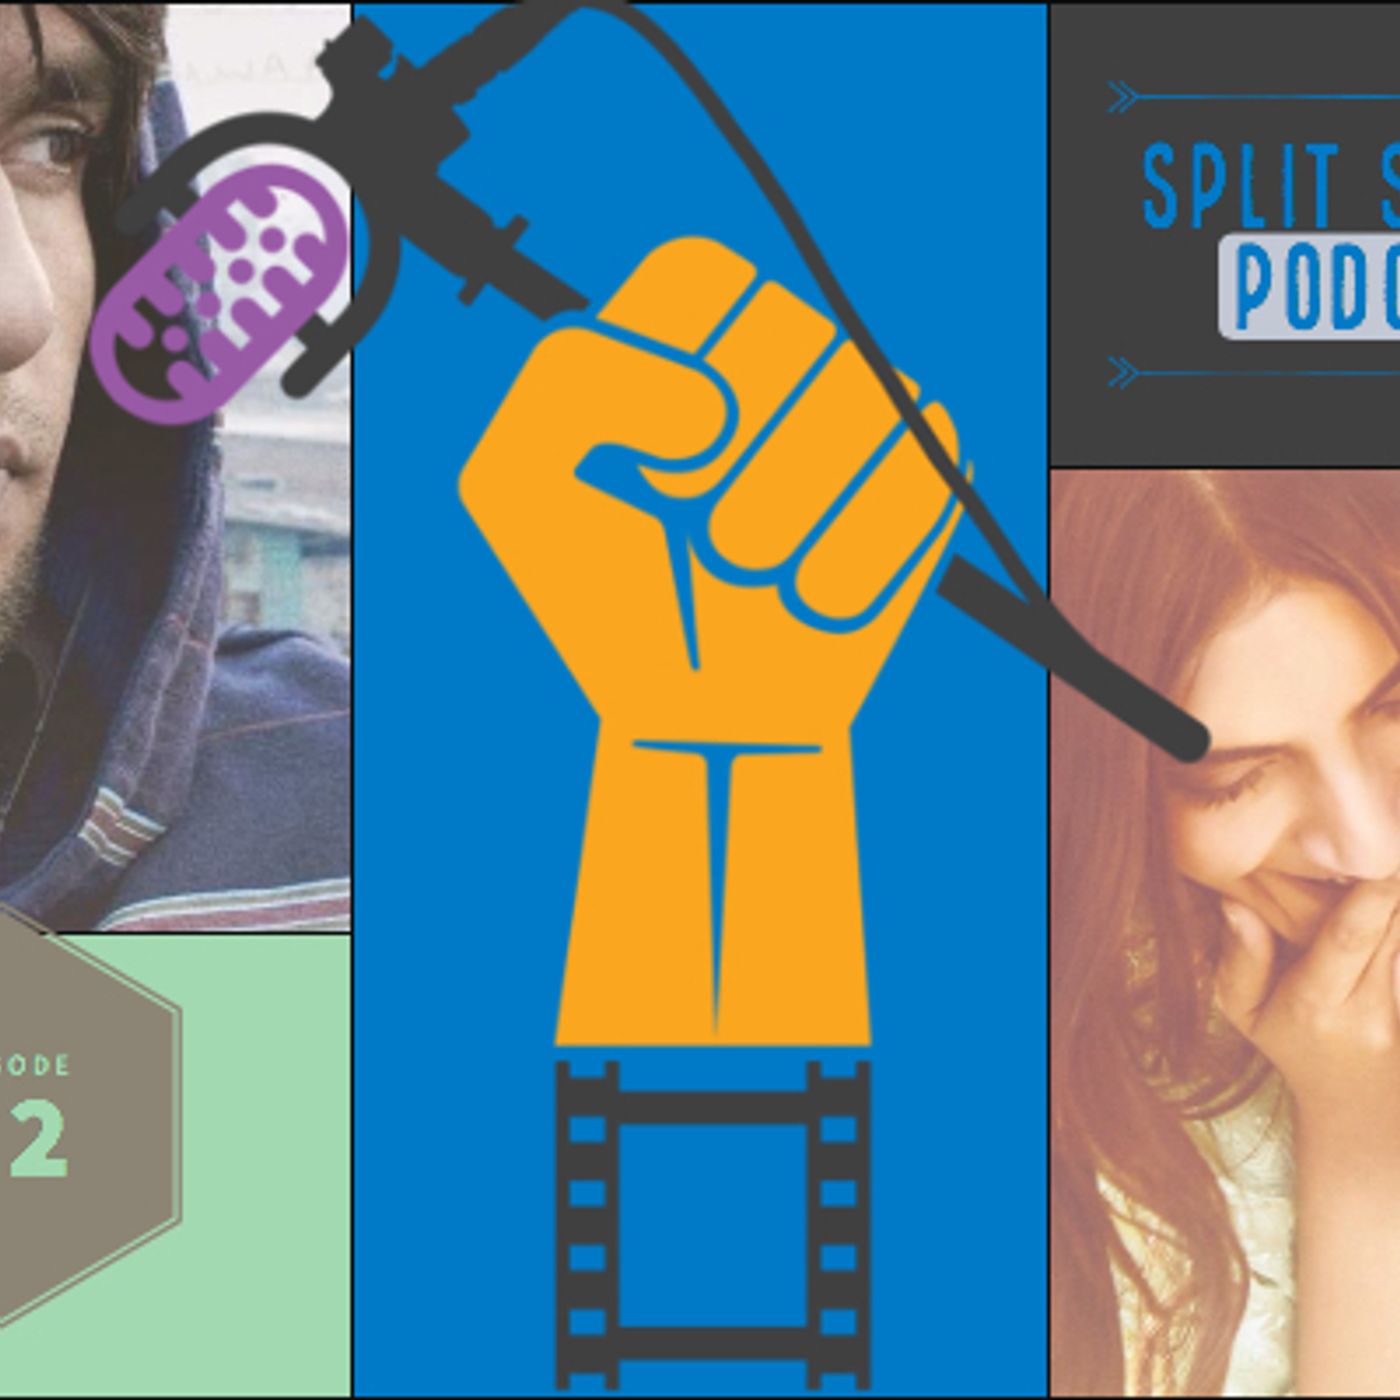 52: Rajkumar Hirani, Gully Boy, A Lesbian Love Story And The Problem With Favs